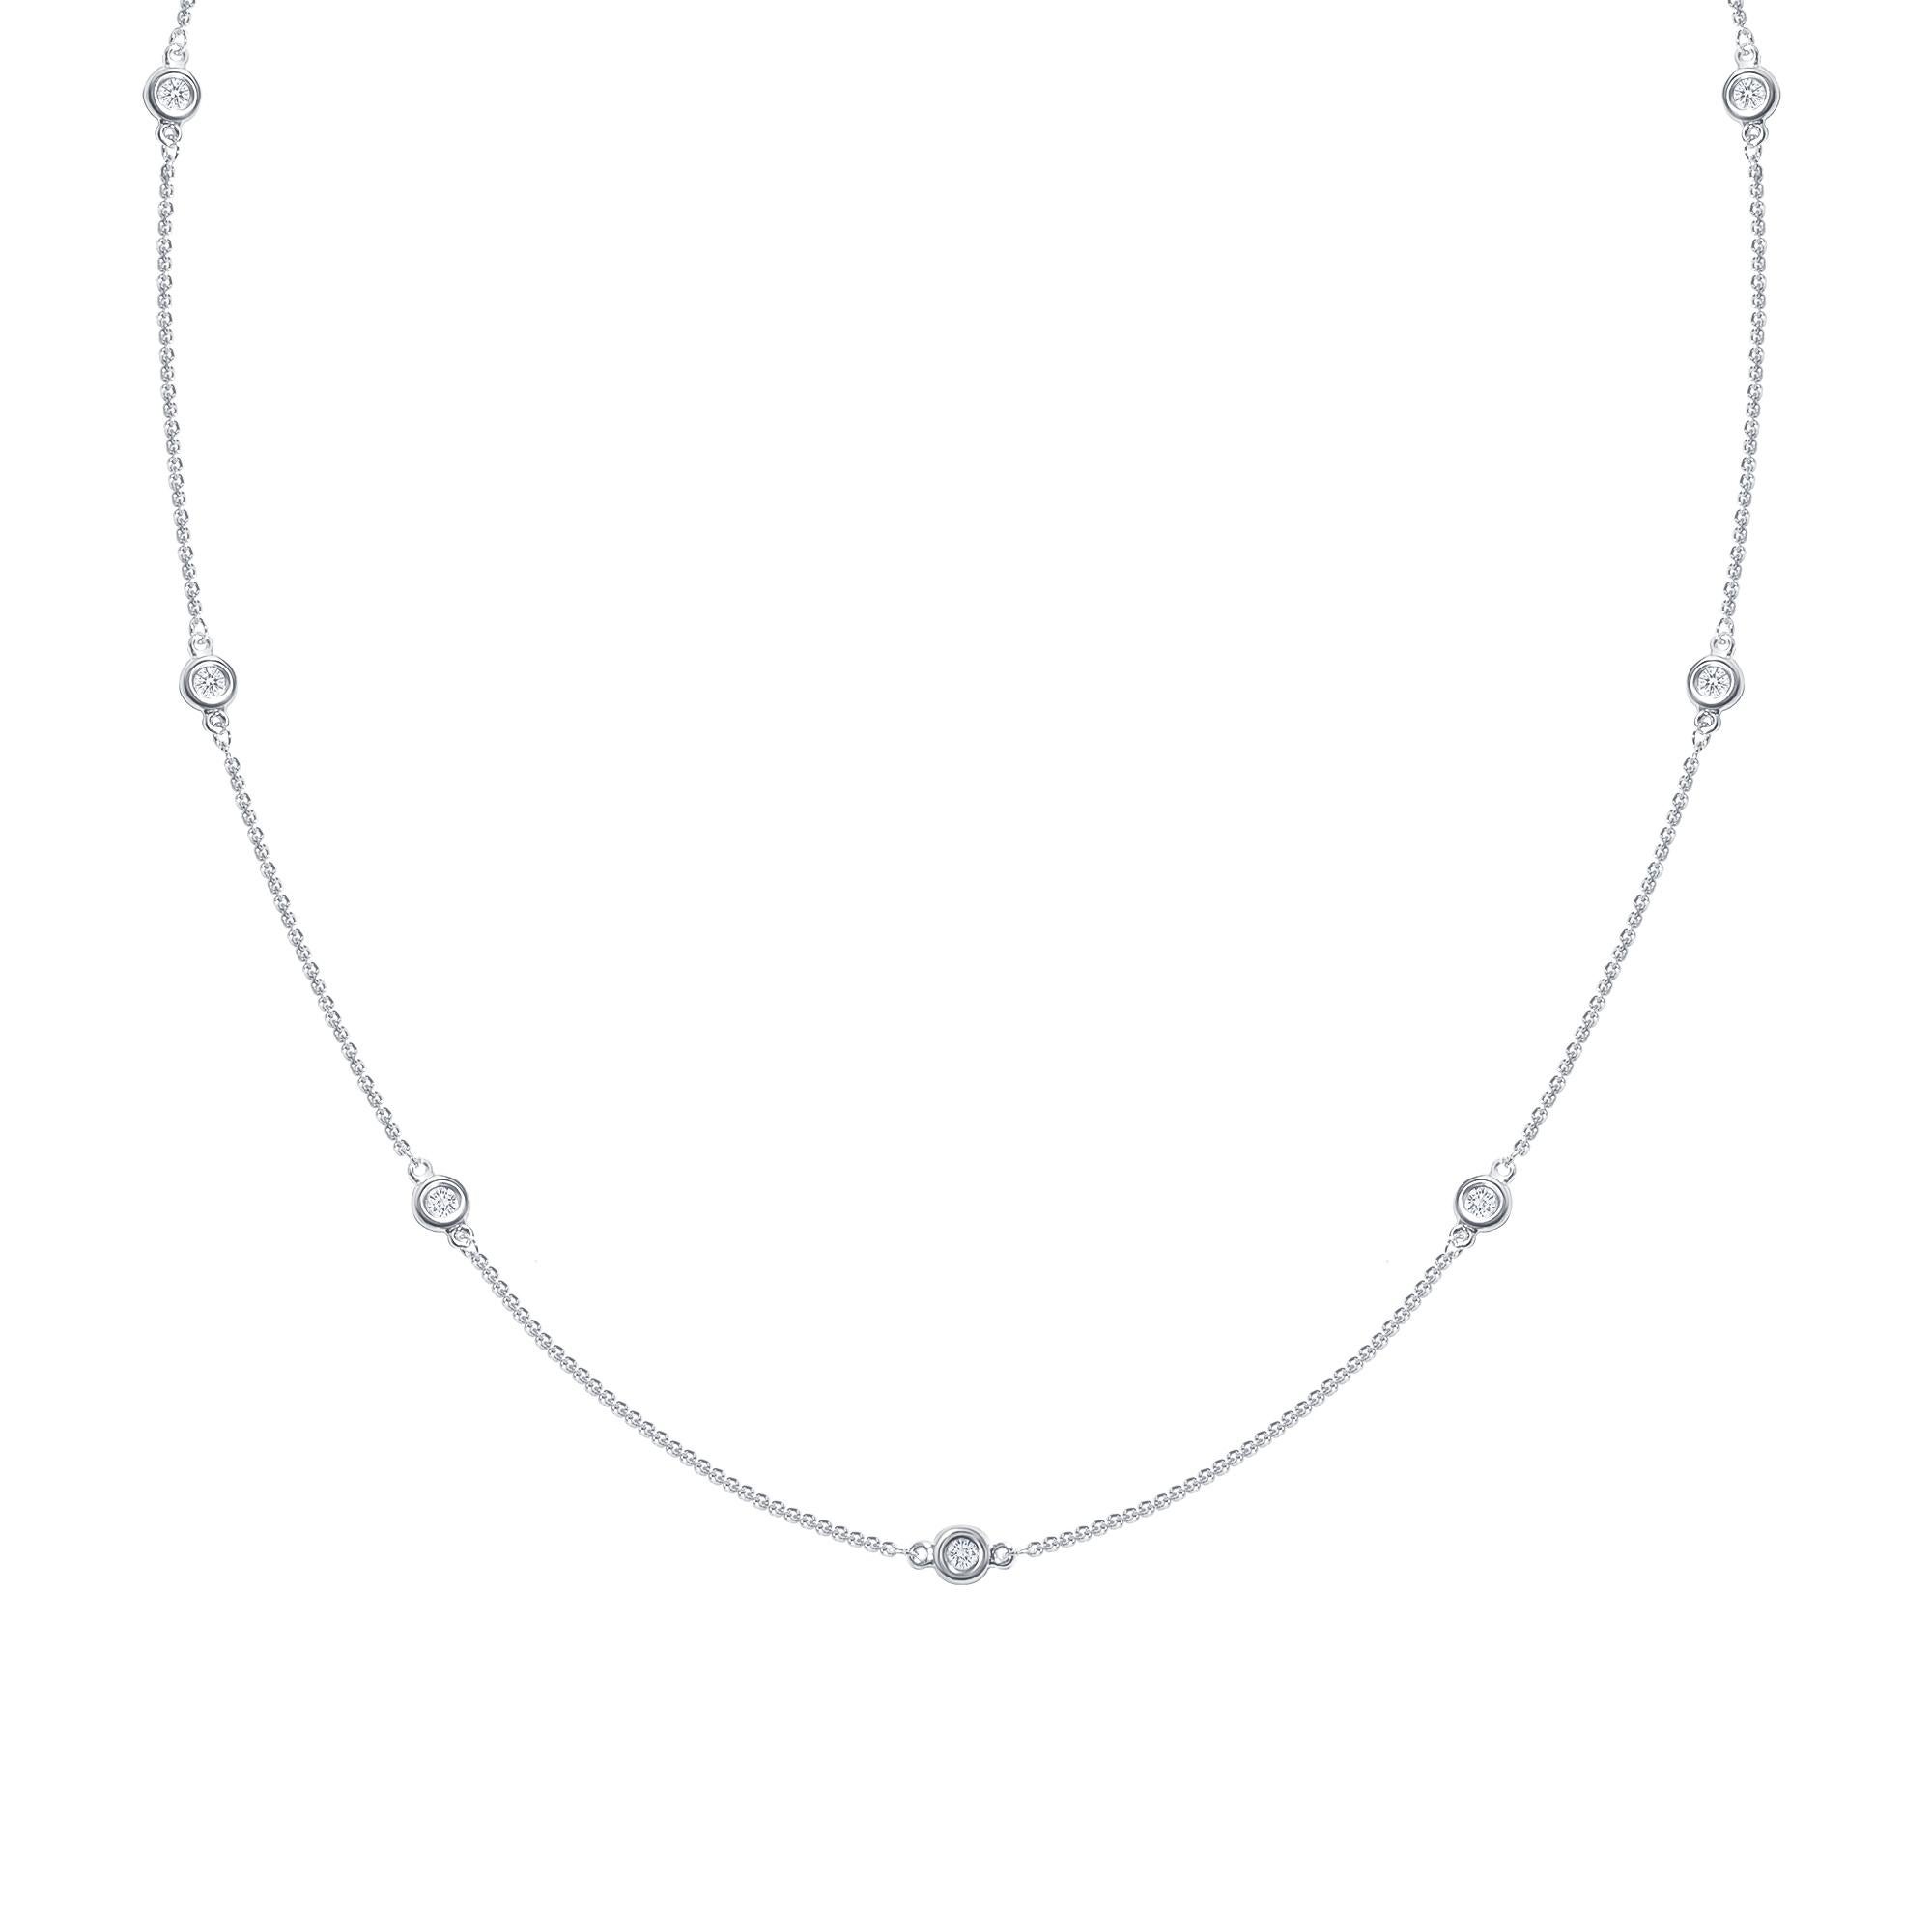 Eight elegant round diamonds set in a bezel setting along a 14k gold chain necklace.

Gold: 14K Gold
Number of Diamonds: Eight
Gold Color: White Gold
Carat: 0.50 Carats
Necklace Length: 18 Inches
Diamond Clarity: VS
Diamond Color: F
Chain Type: